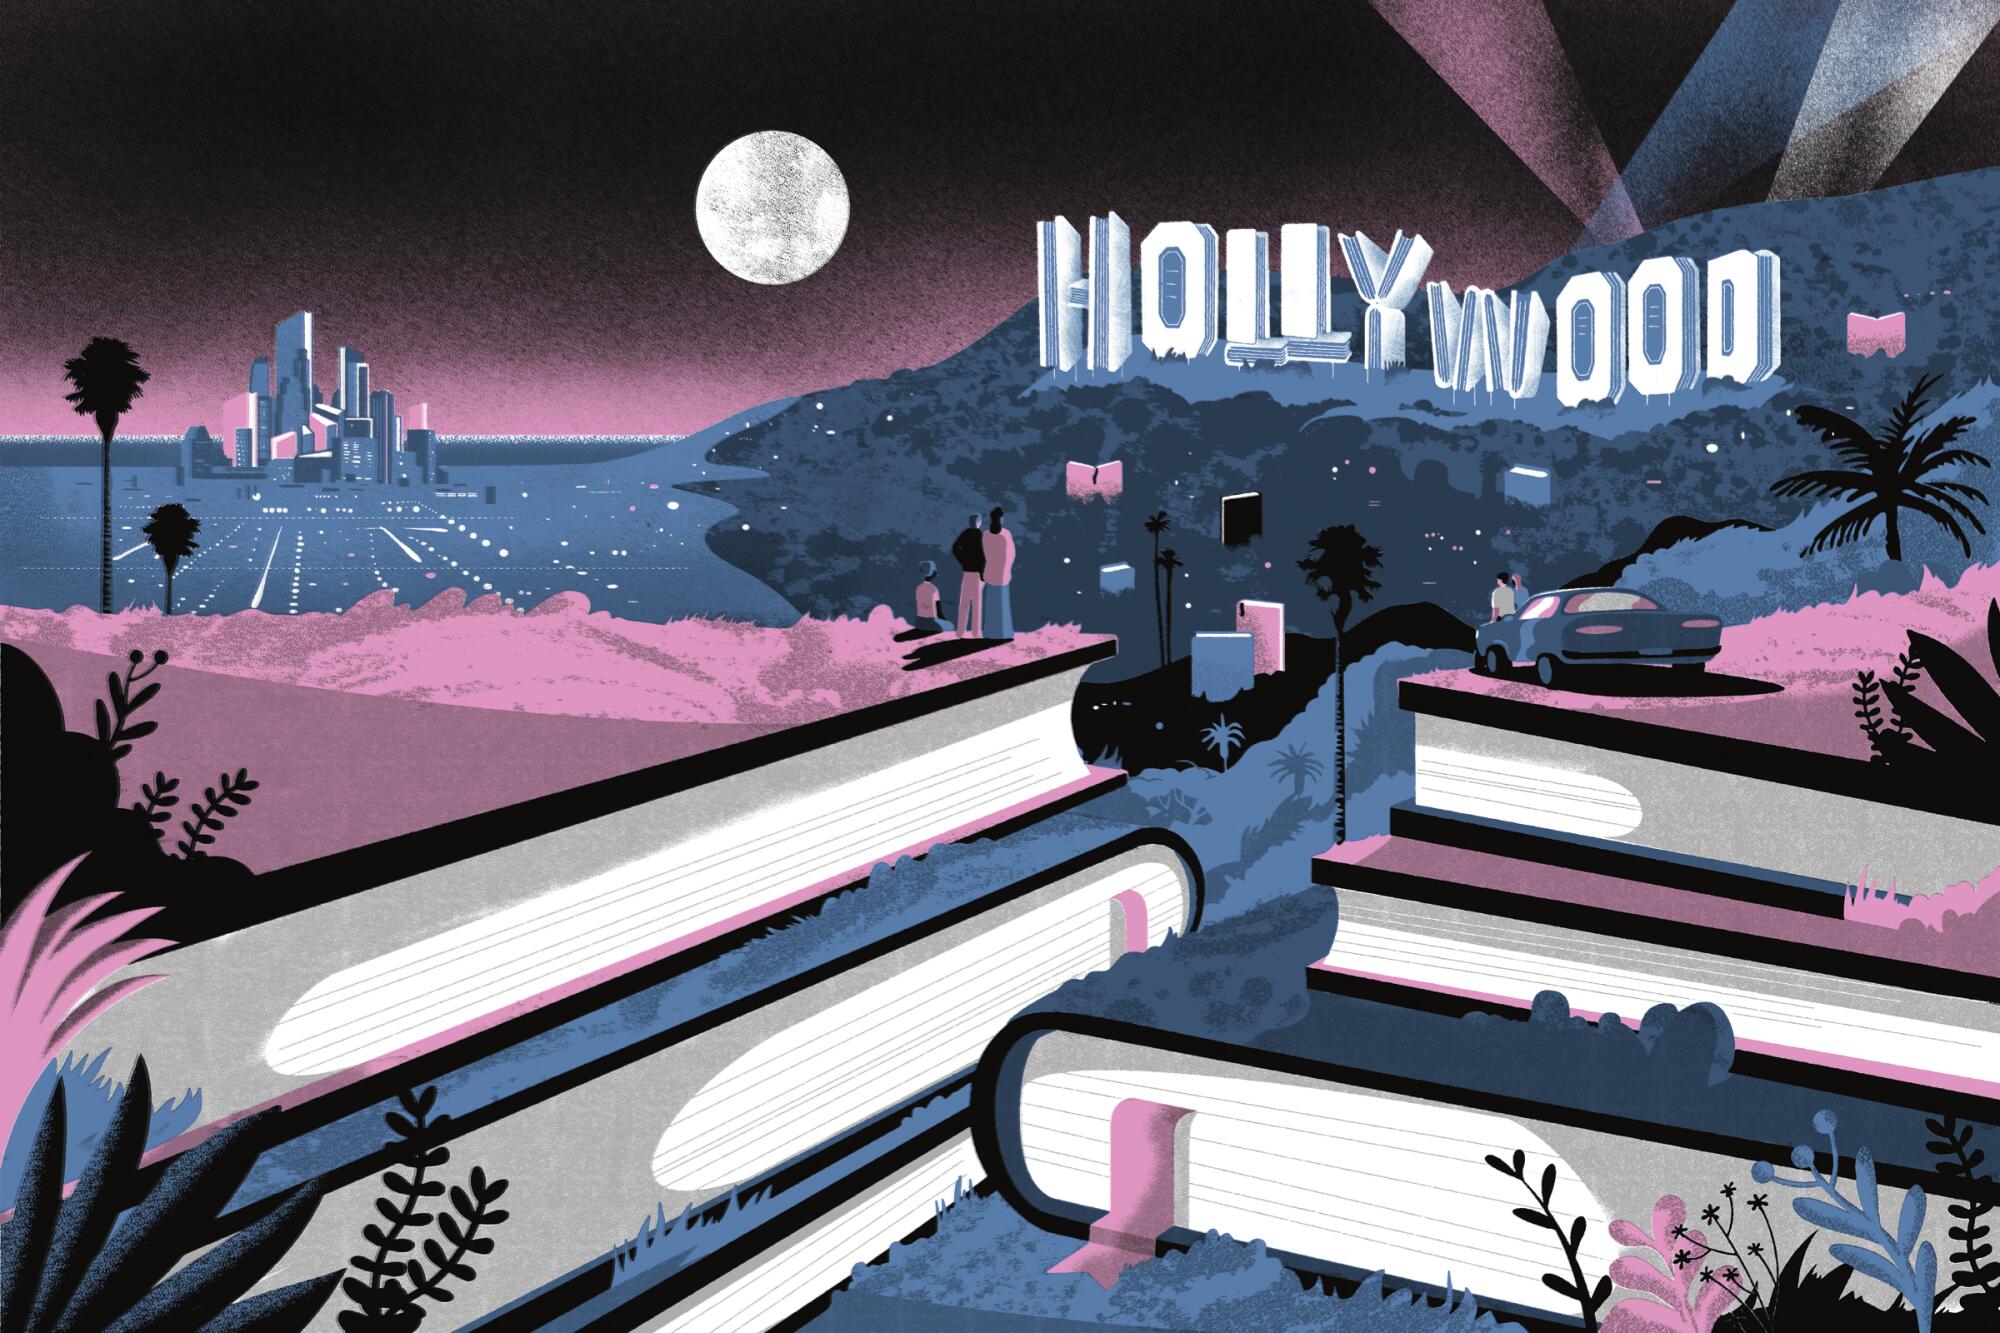 The 50 best Hollywood books of all time: novels, memoirs and more